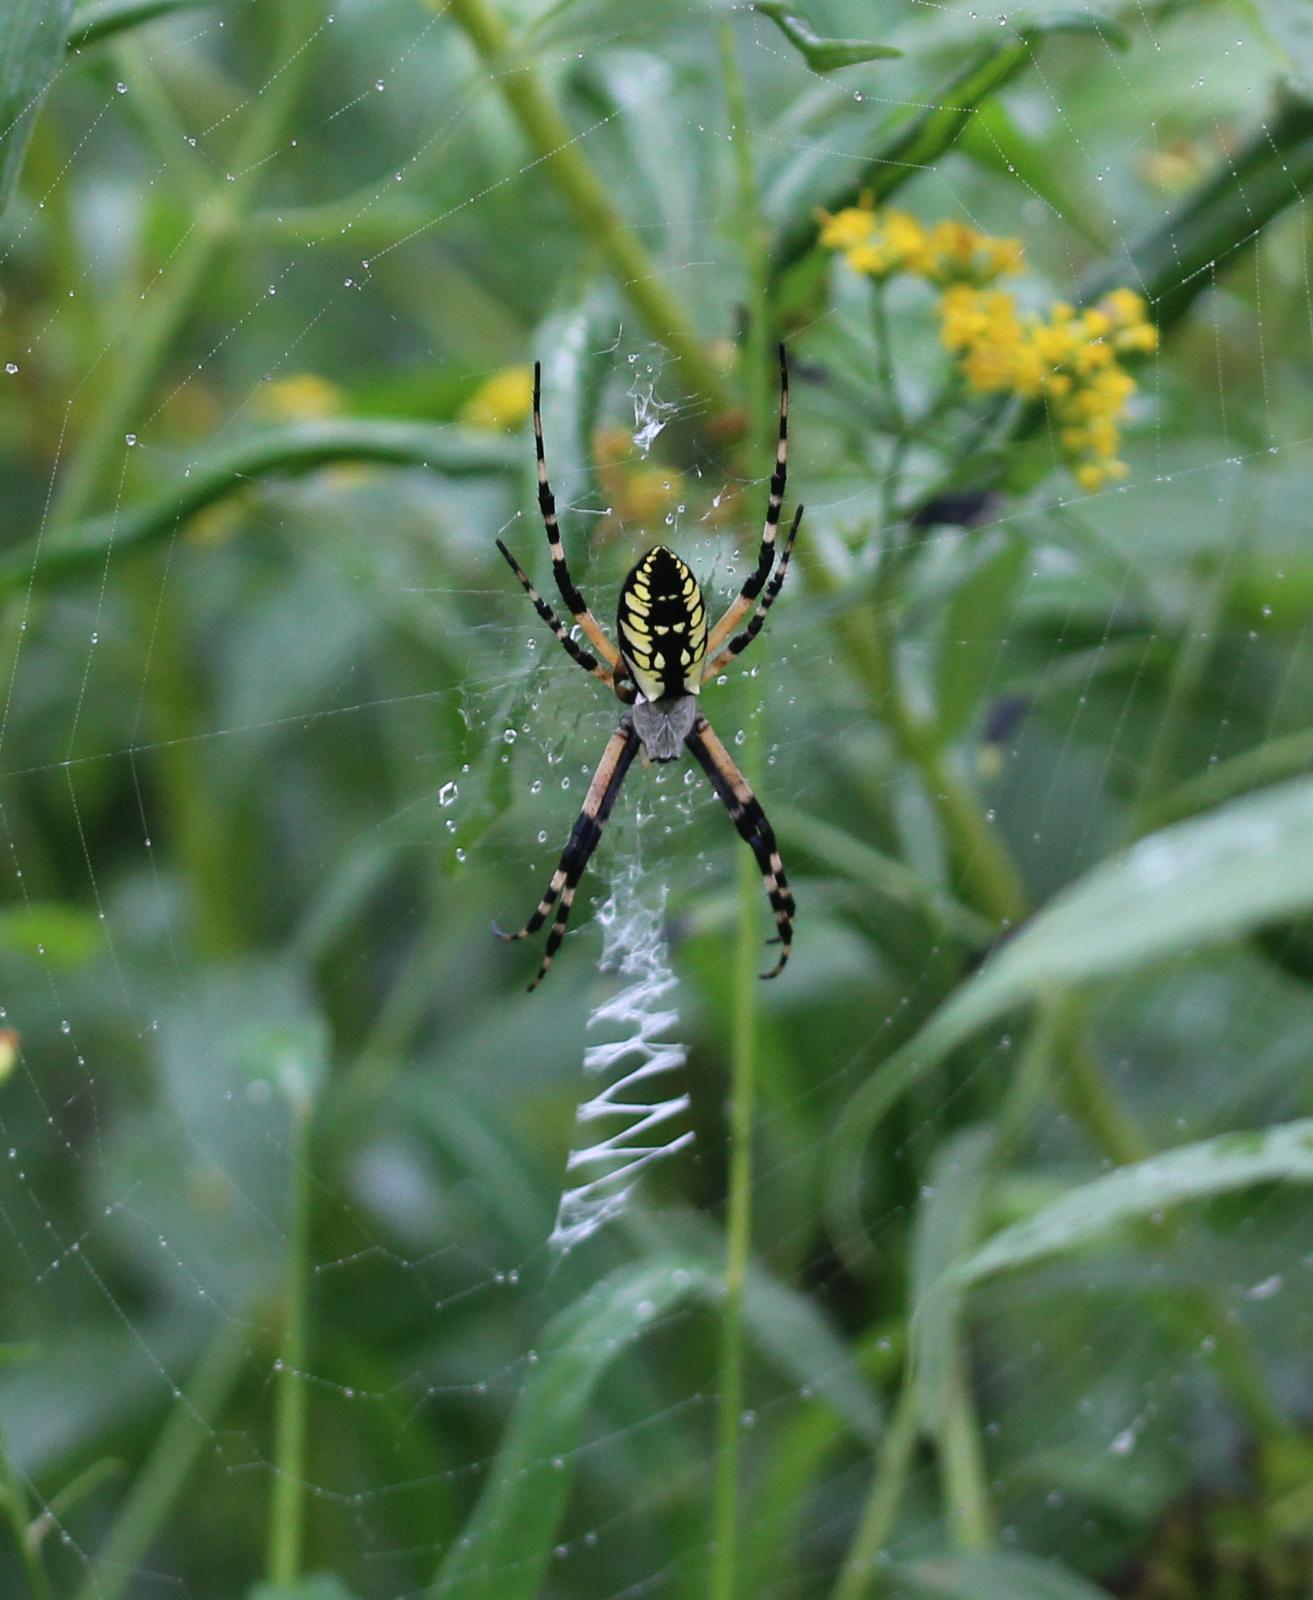 Large black and yellow spider, on web, with vegetation and golden rod blossoms.